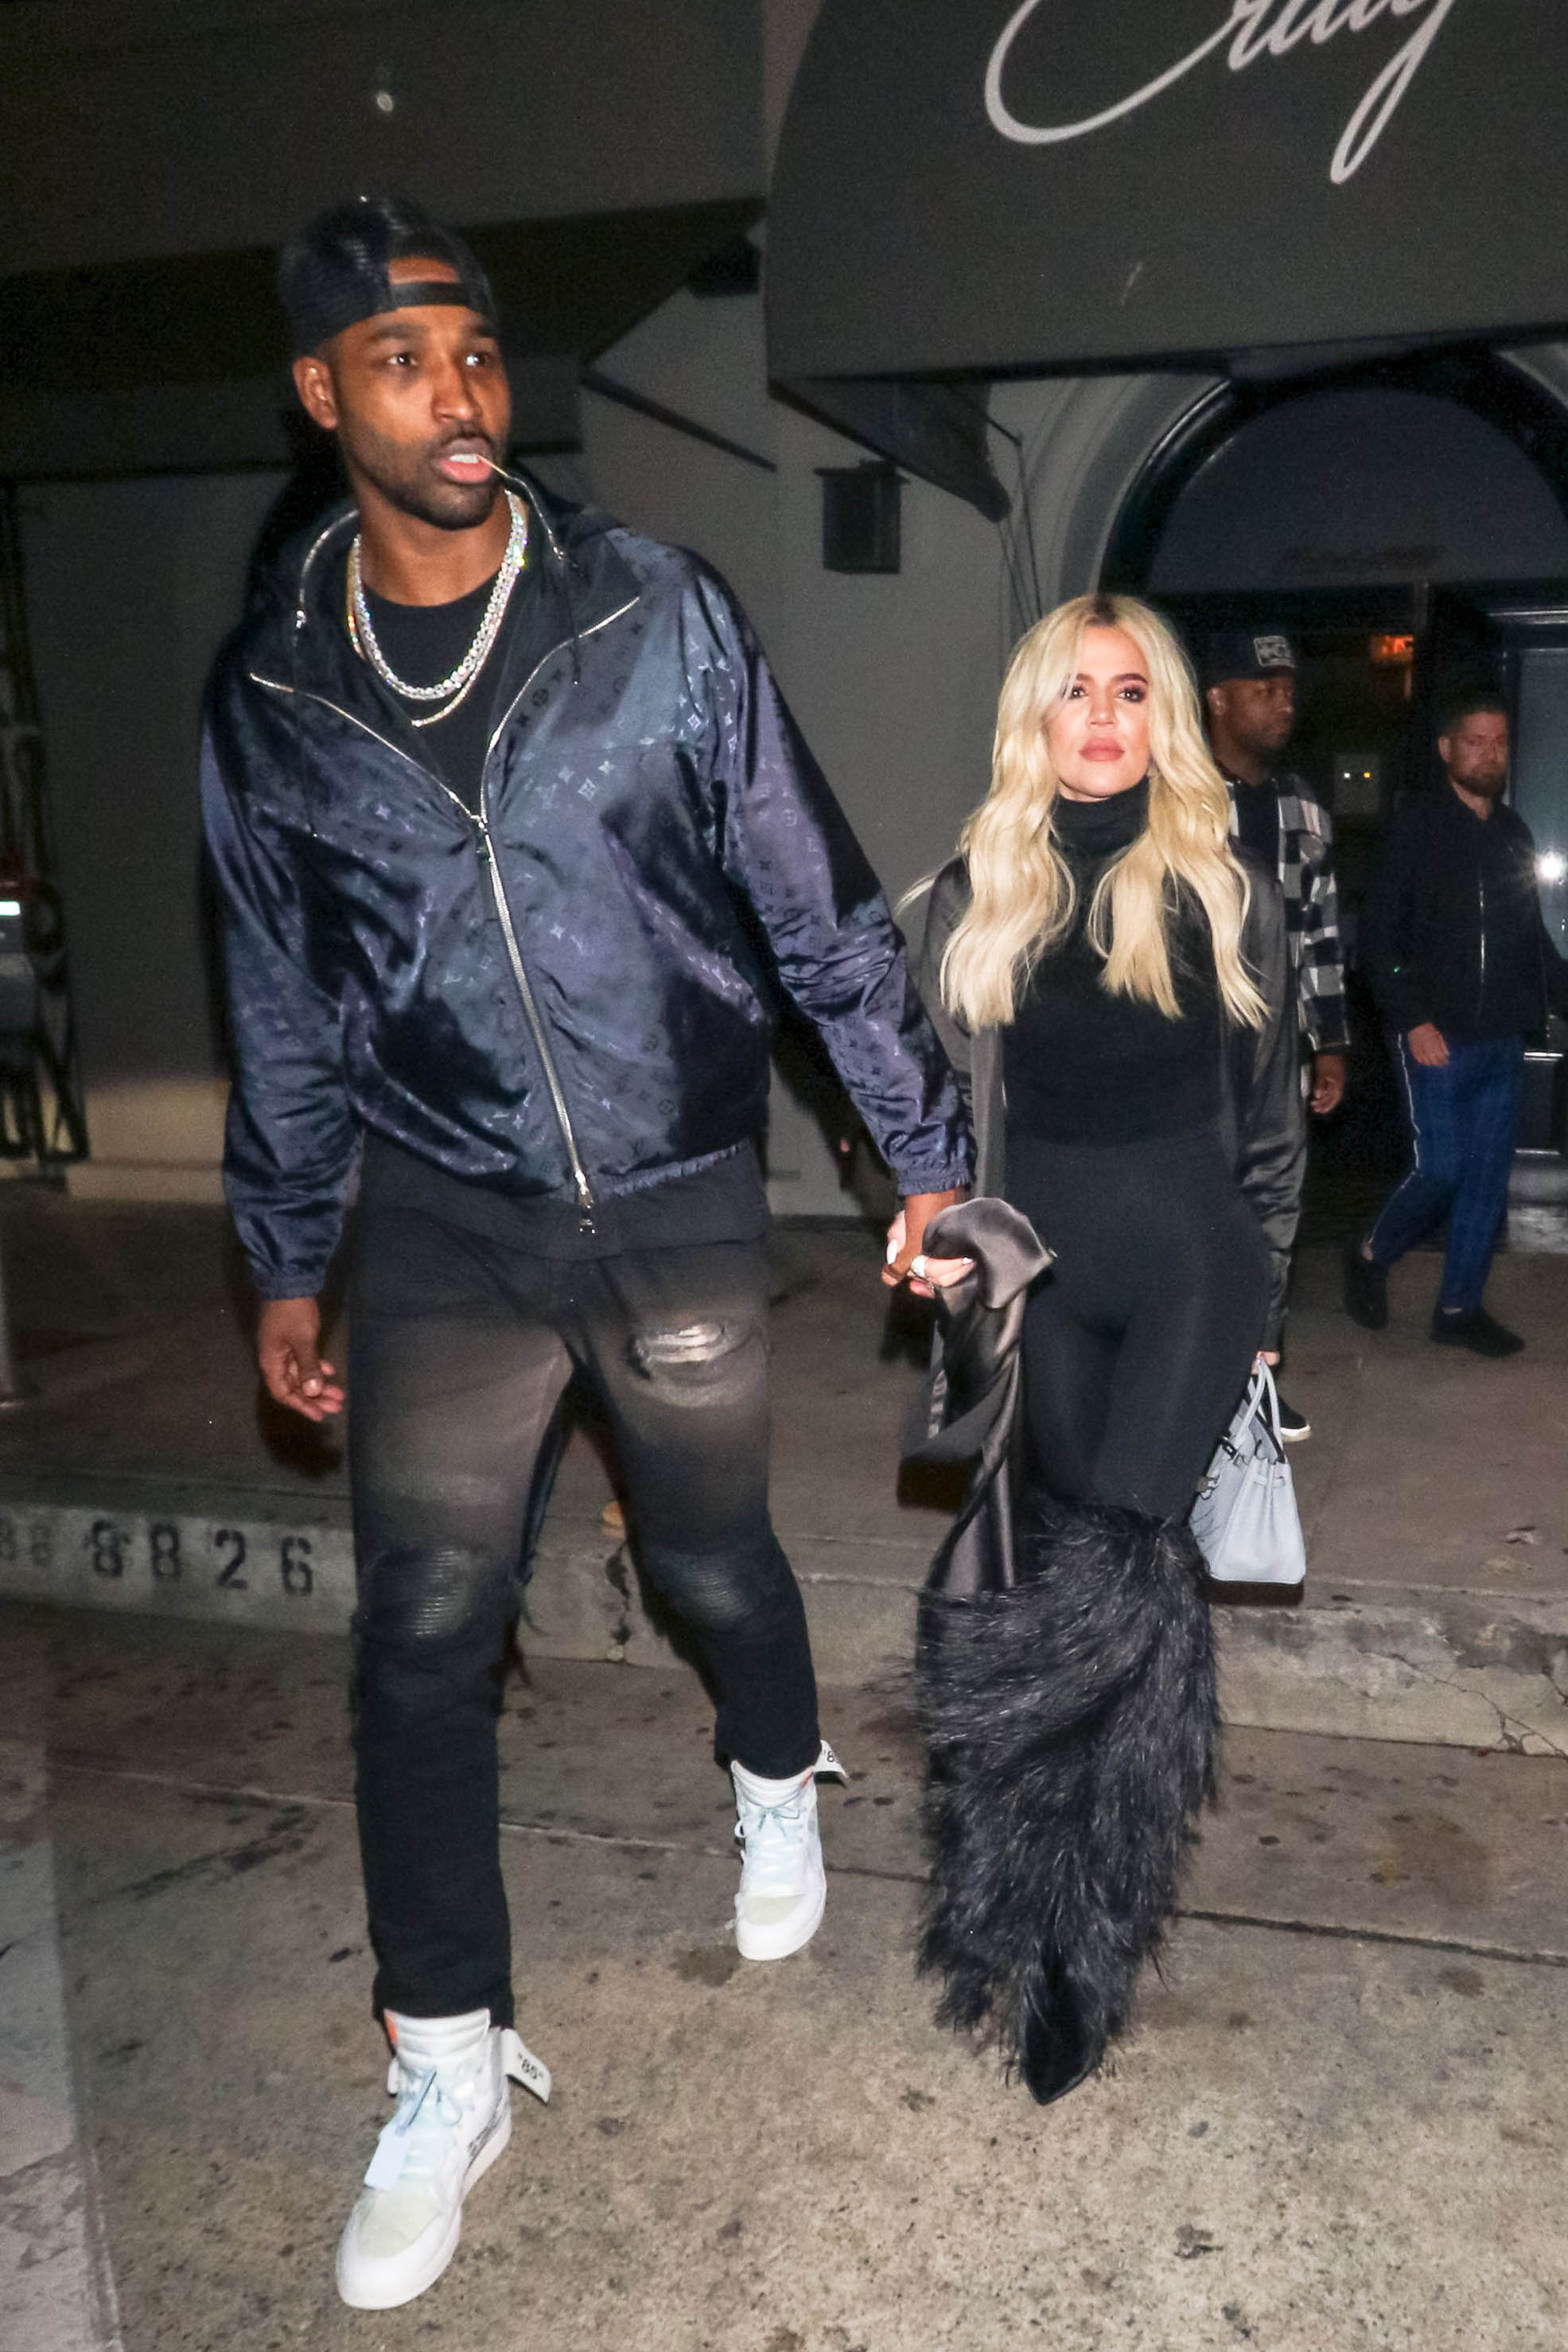 Tristan and Khloe have had a tumultuous relationship following the NBA star's multiple cheating scandals